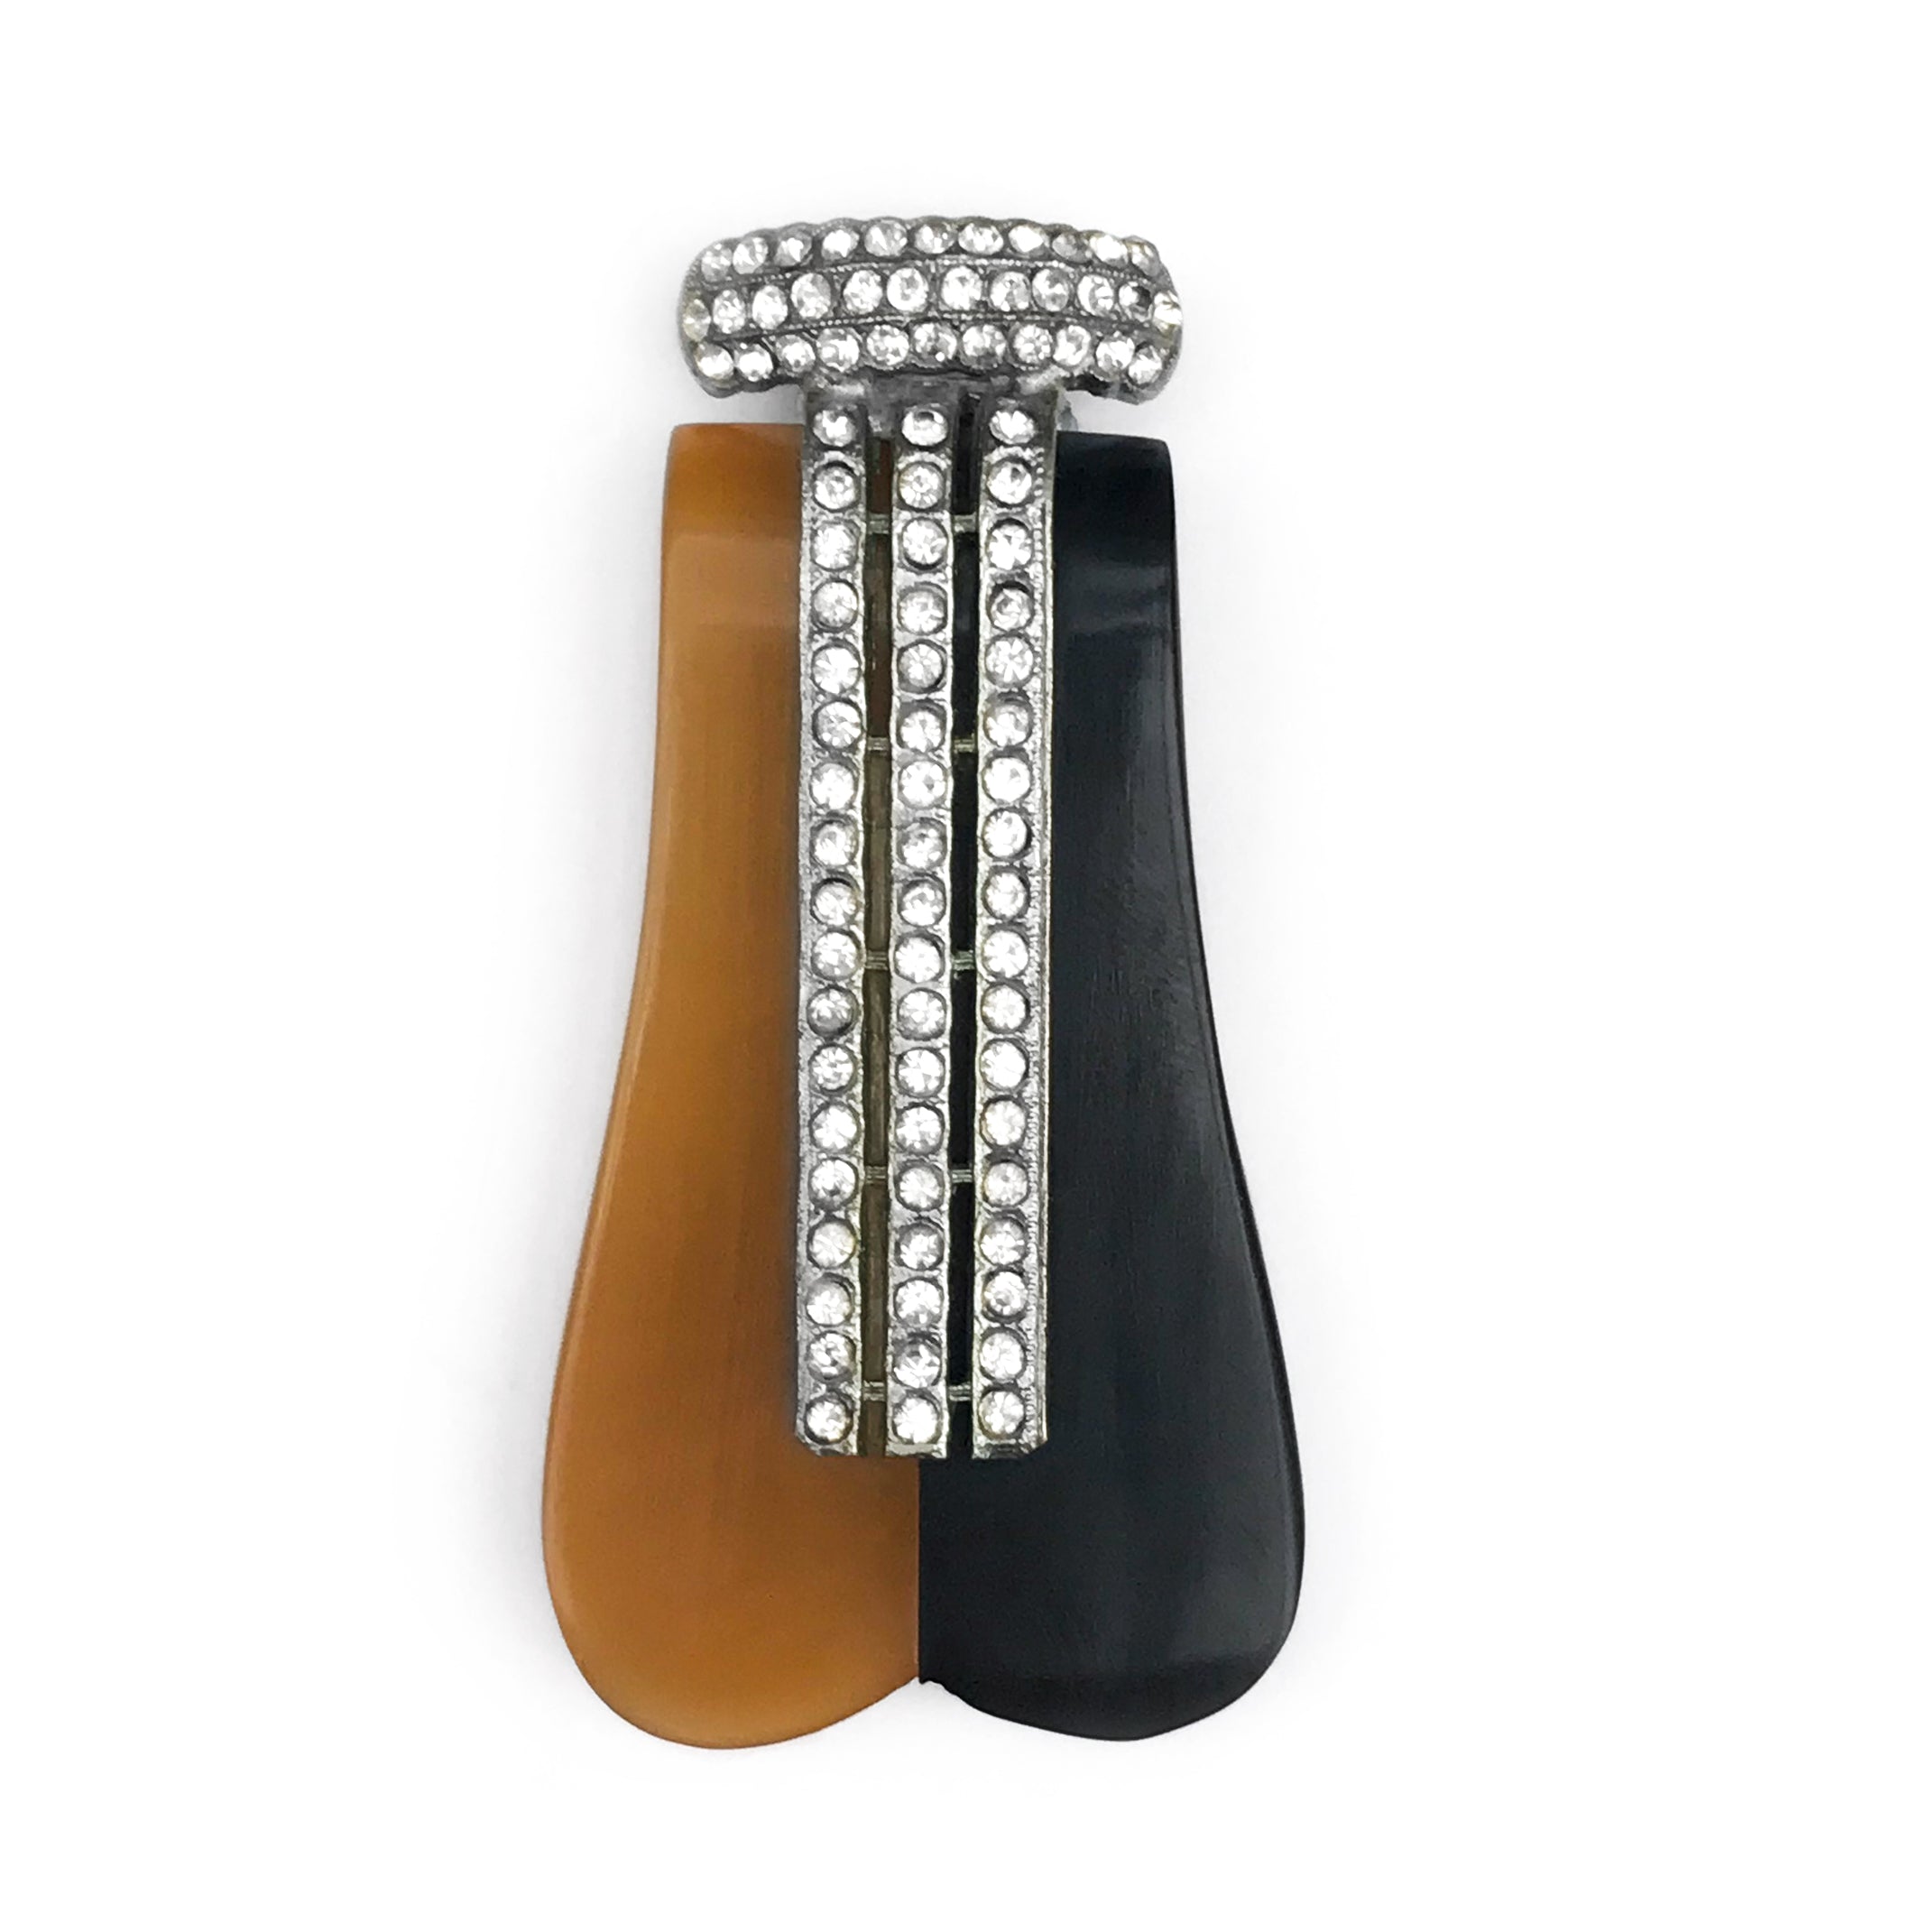 A magnificent art deco dress clip topped with diamantes. The duo colour base is topped with diamantes set in silvertone metal. It can be clipped to a dress or coat to add instant deco glamour - SHOP NOW - www.intovintage.co.uk